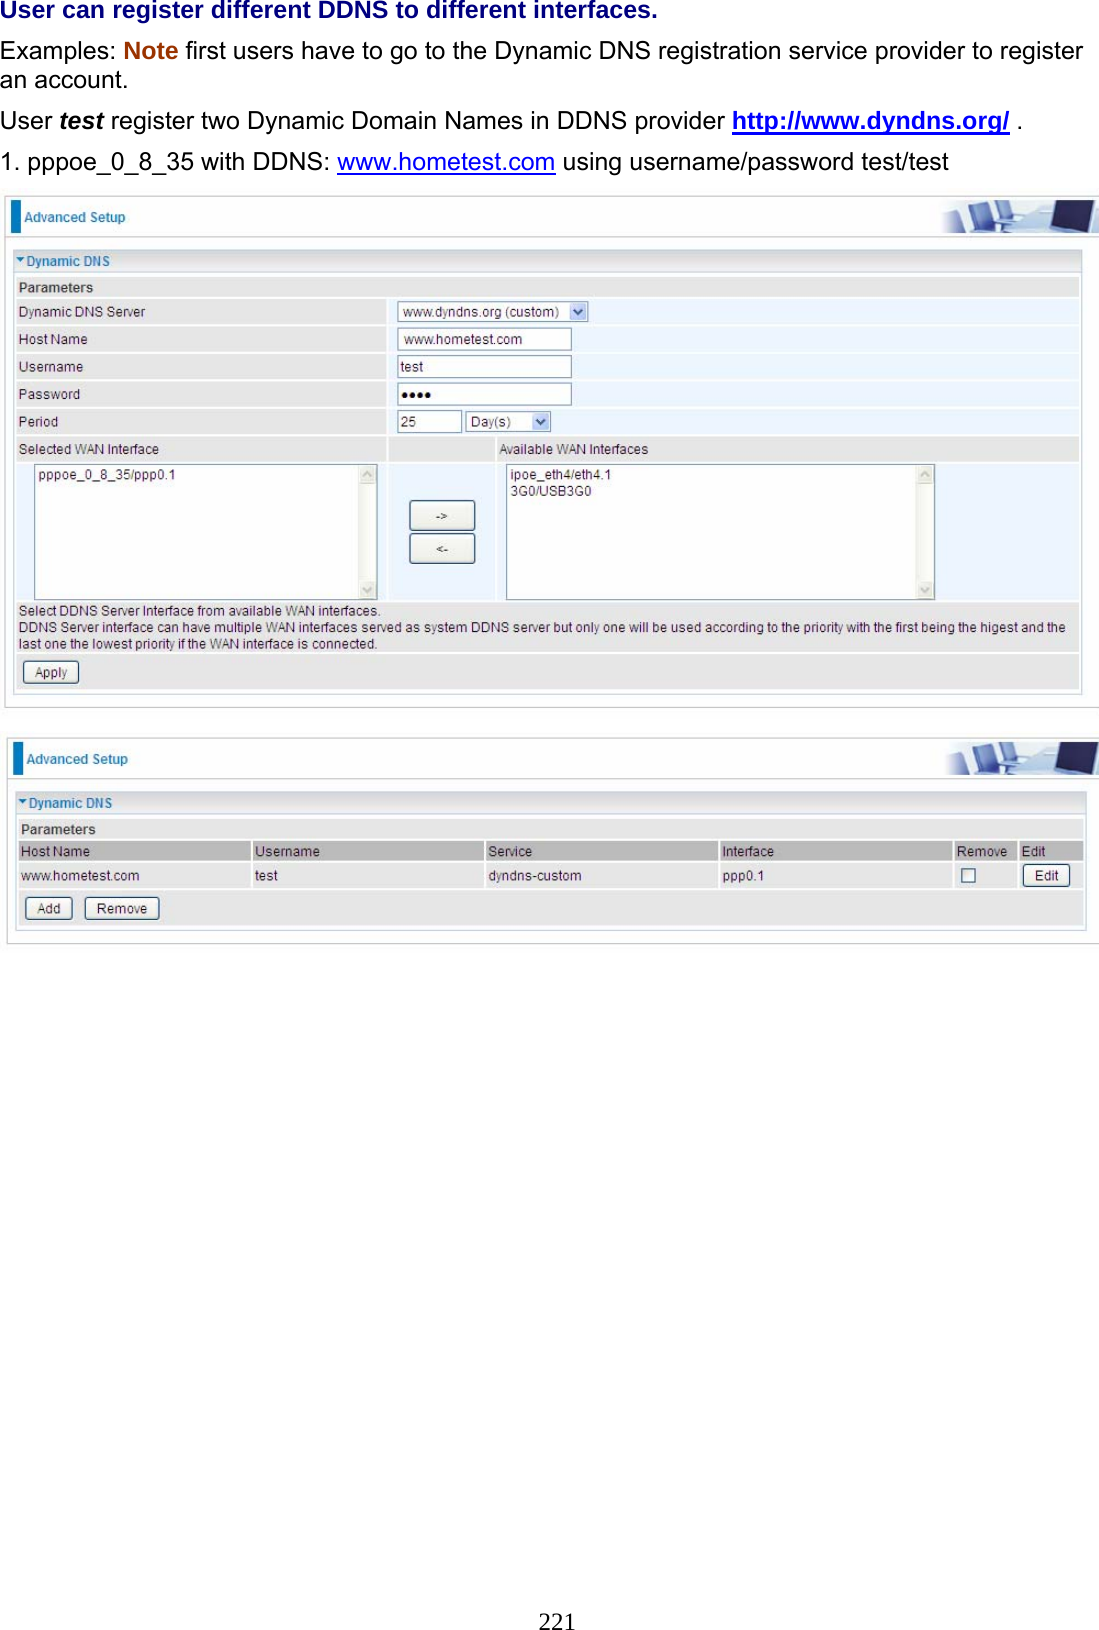 221 User can register different DDNS to different interfaces. Examples: Note first users have to go to the Dynamic DNS registration service provider to register an account. User test register two Dynamic Domain Names in DDNS provider http://www.dyndns.org/ . 1. pppoe_0_8_35 with DDNS: www.hometest.com using username/password test/test      